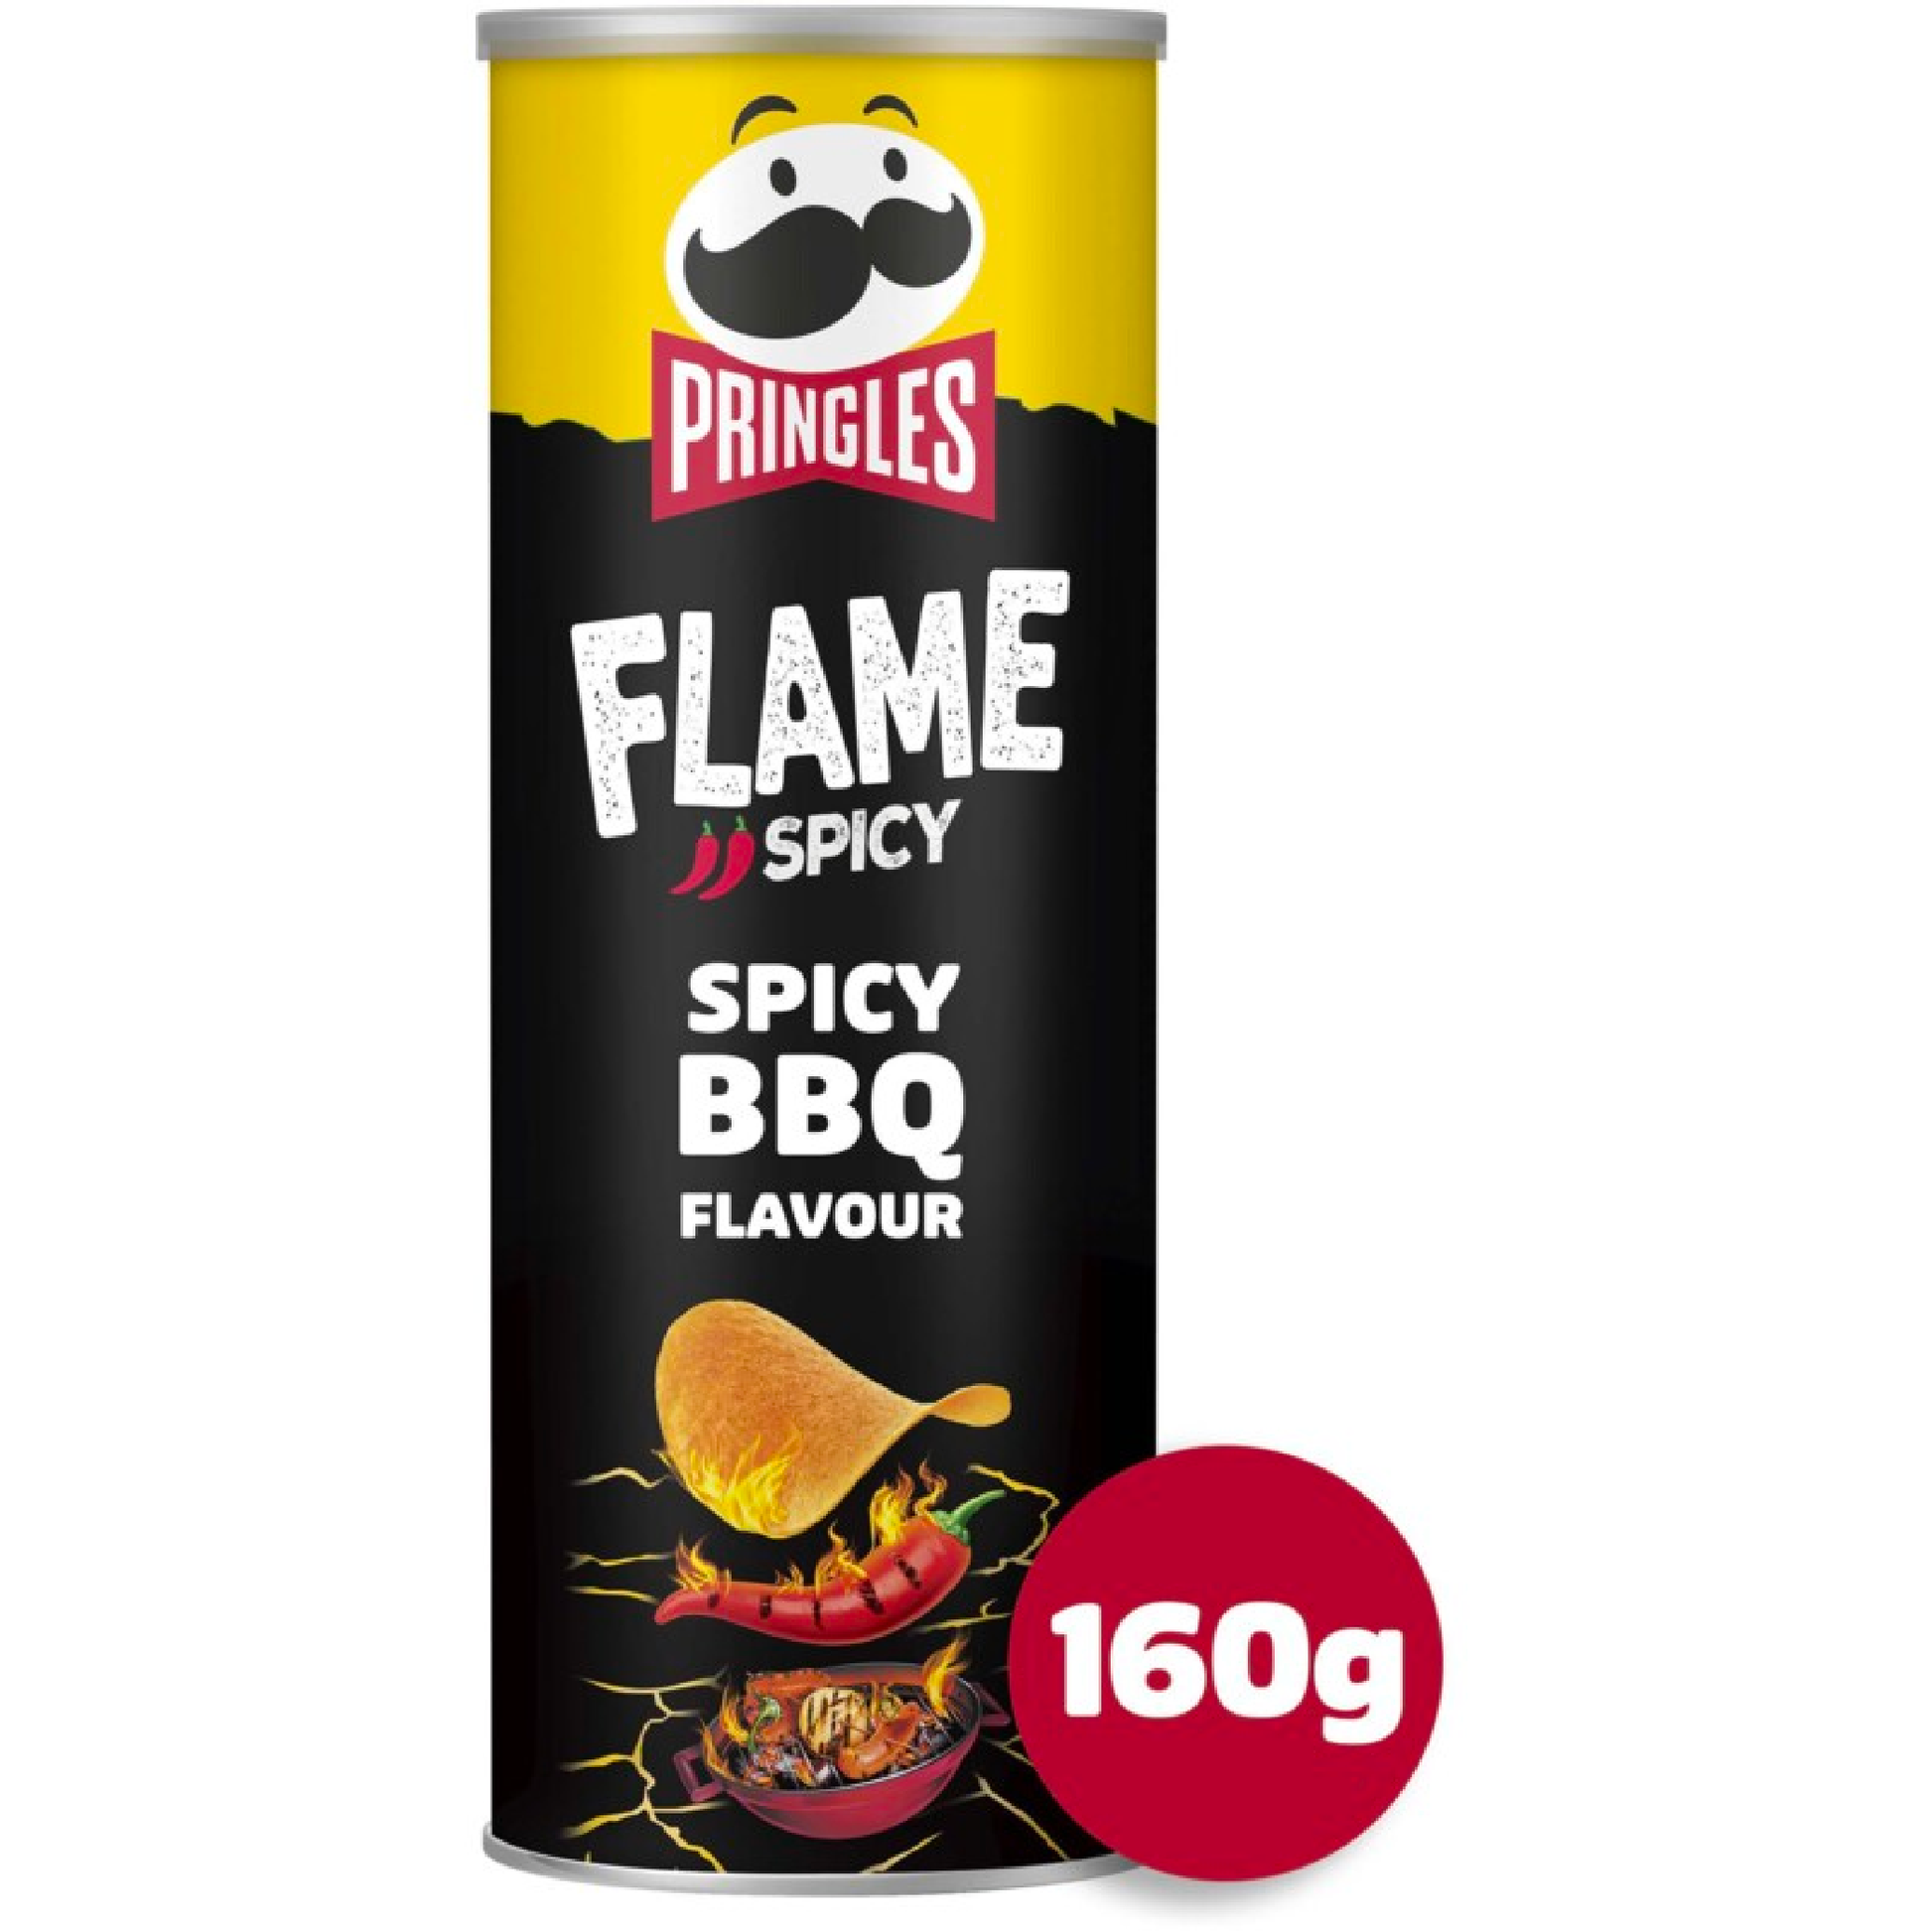 Pringles Flame Spicy BBQ 160g - Snack-It